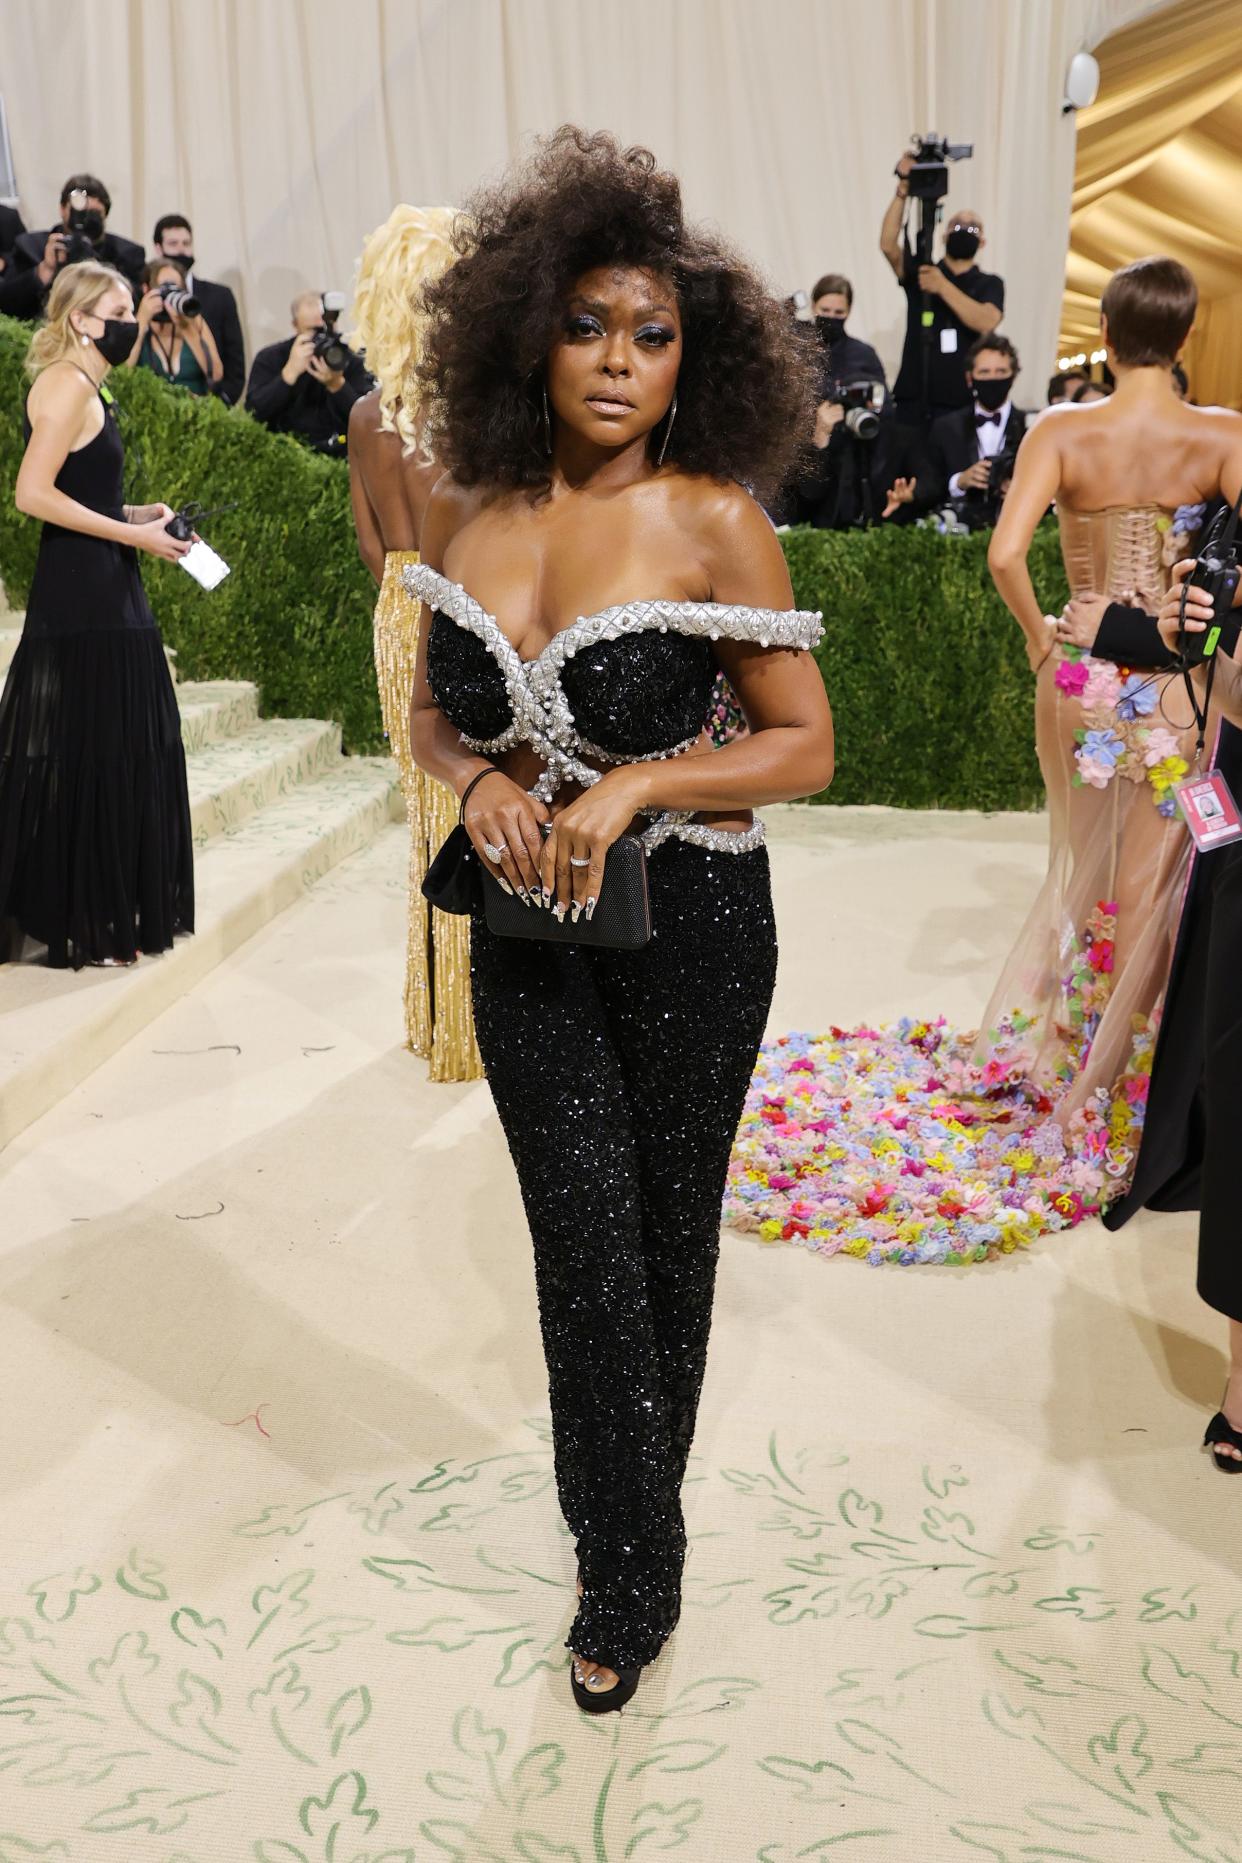 Taraji P. Henson attends The 2021 Met Gala Celebrating In America: A Lexicon Of Fashion at Metropolitan Museum of Art on Sept. 13, 2021 in New York.